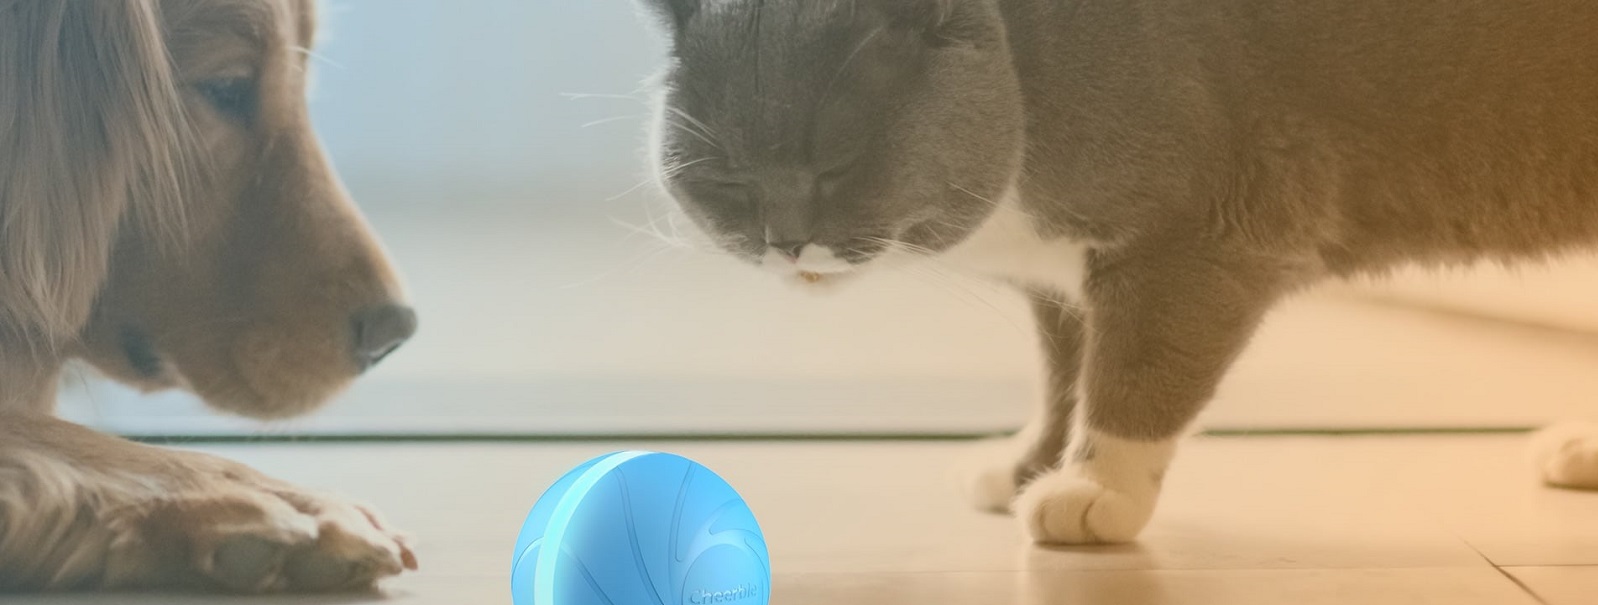 Cheerble's Wicked Ball is a smart toy that likes to play games with your dog